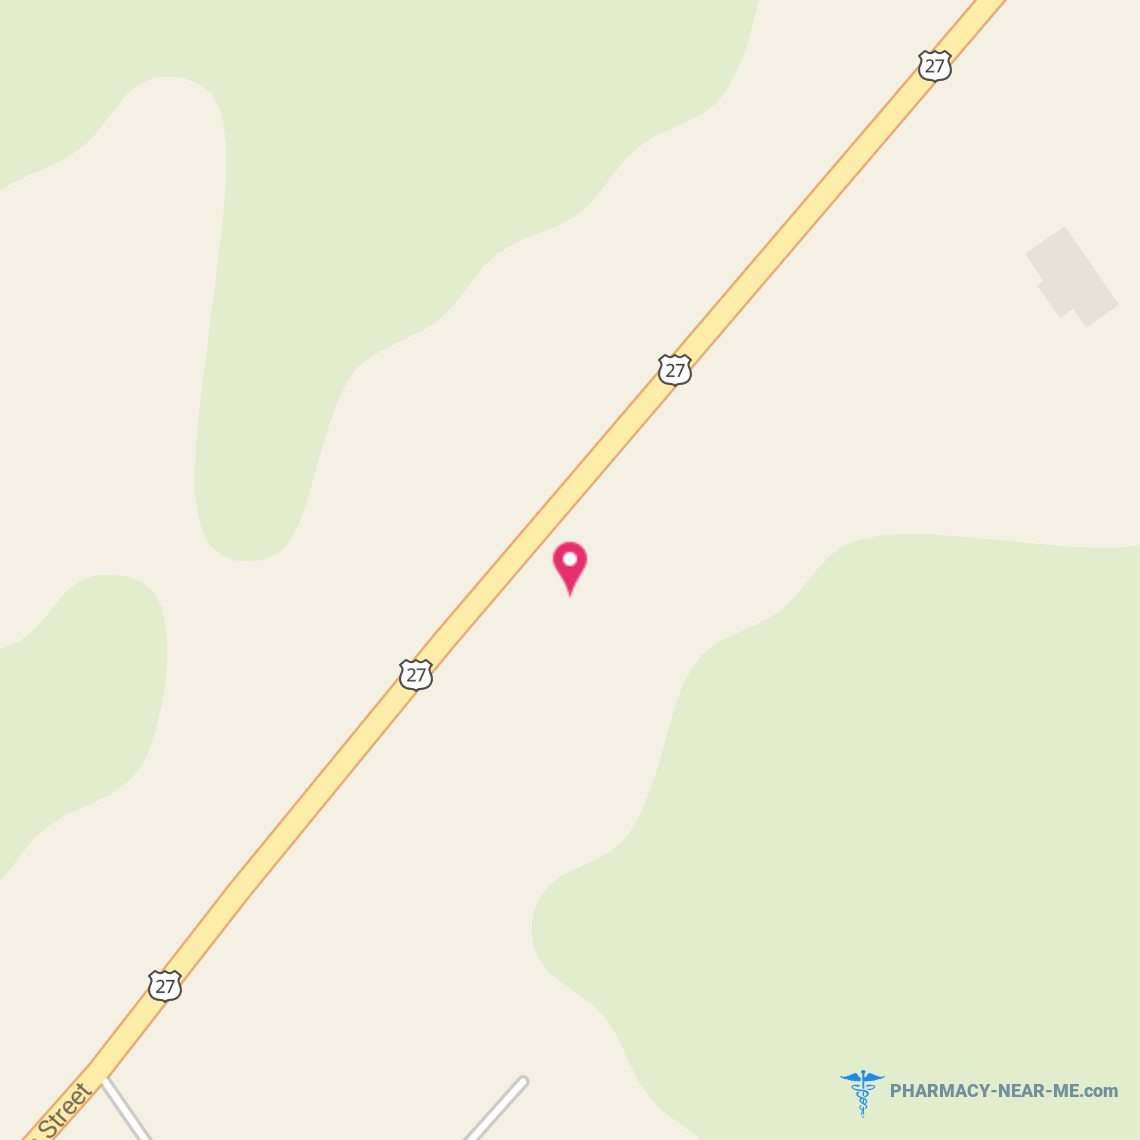 PLATEAU DRUGS - Pharmacy Hours, Phone, Reviews & Information: 18157 South Alberta Street, Oneida, Tennessee 37841, United States